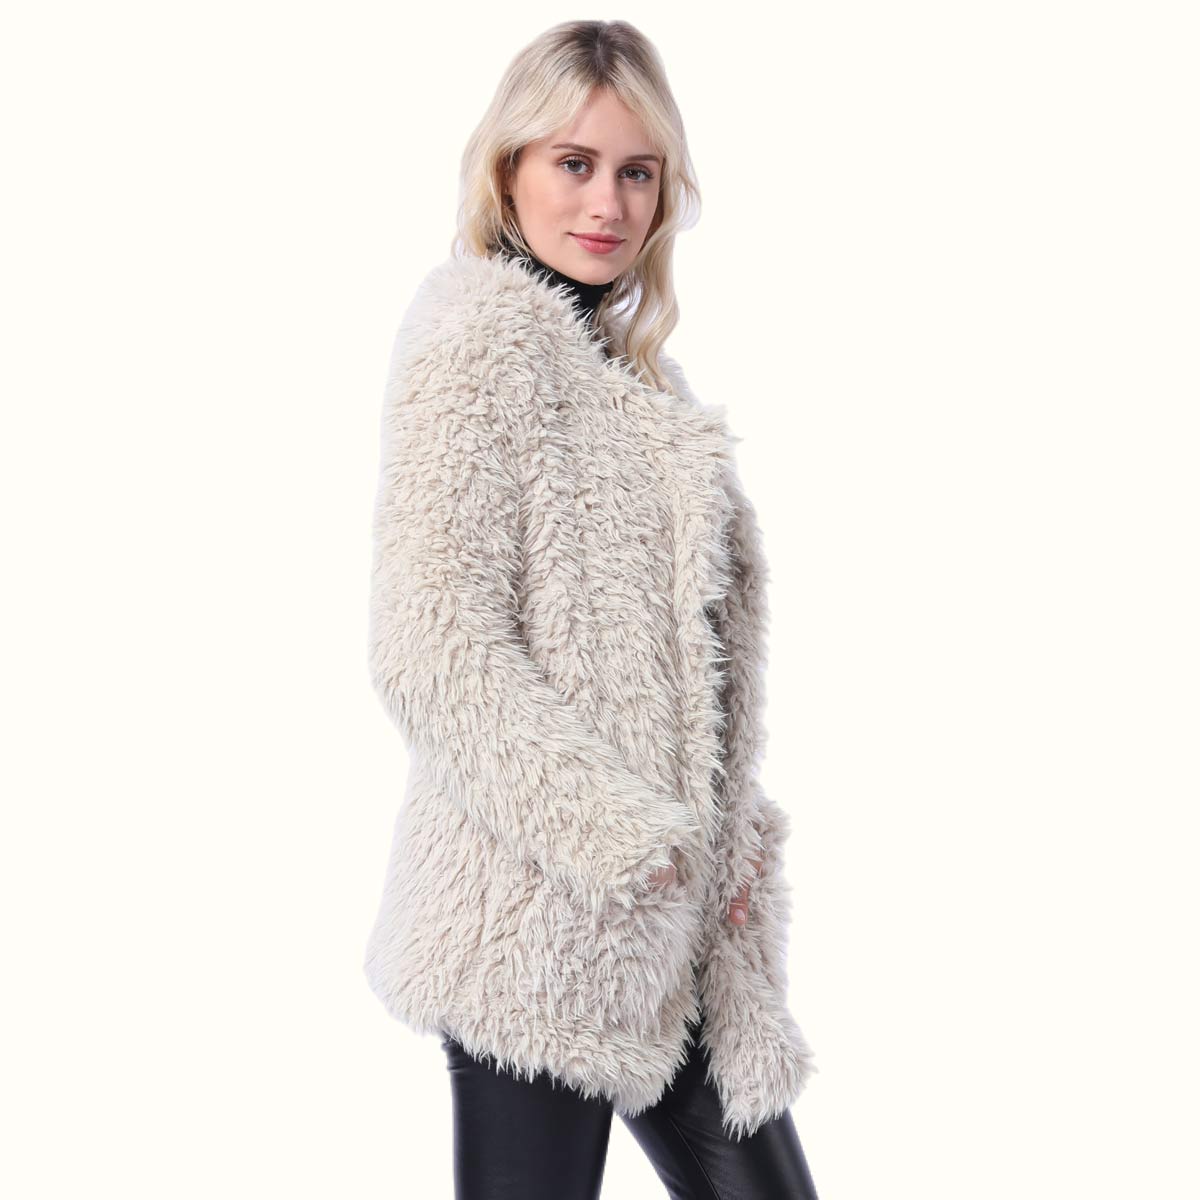 White Teddy Fur Coat viewed from right side